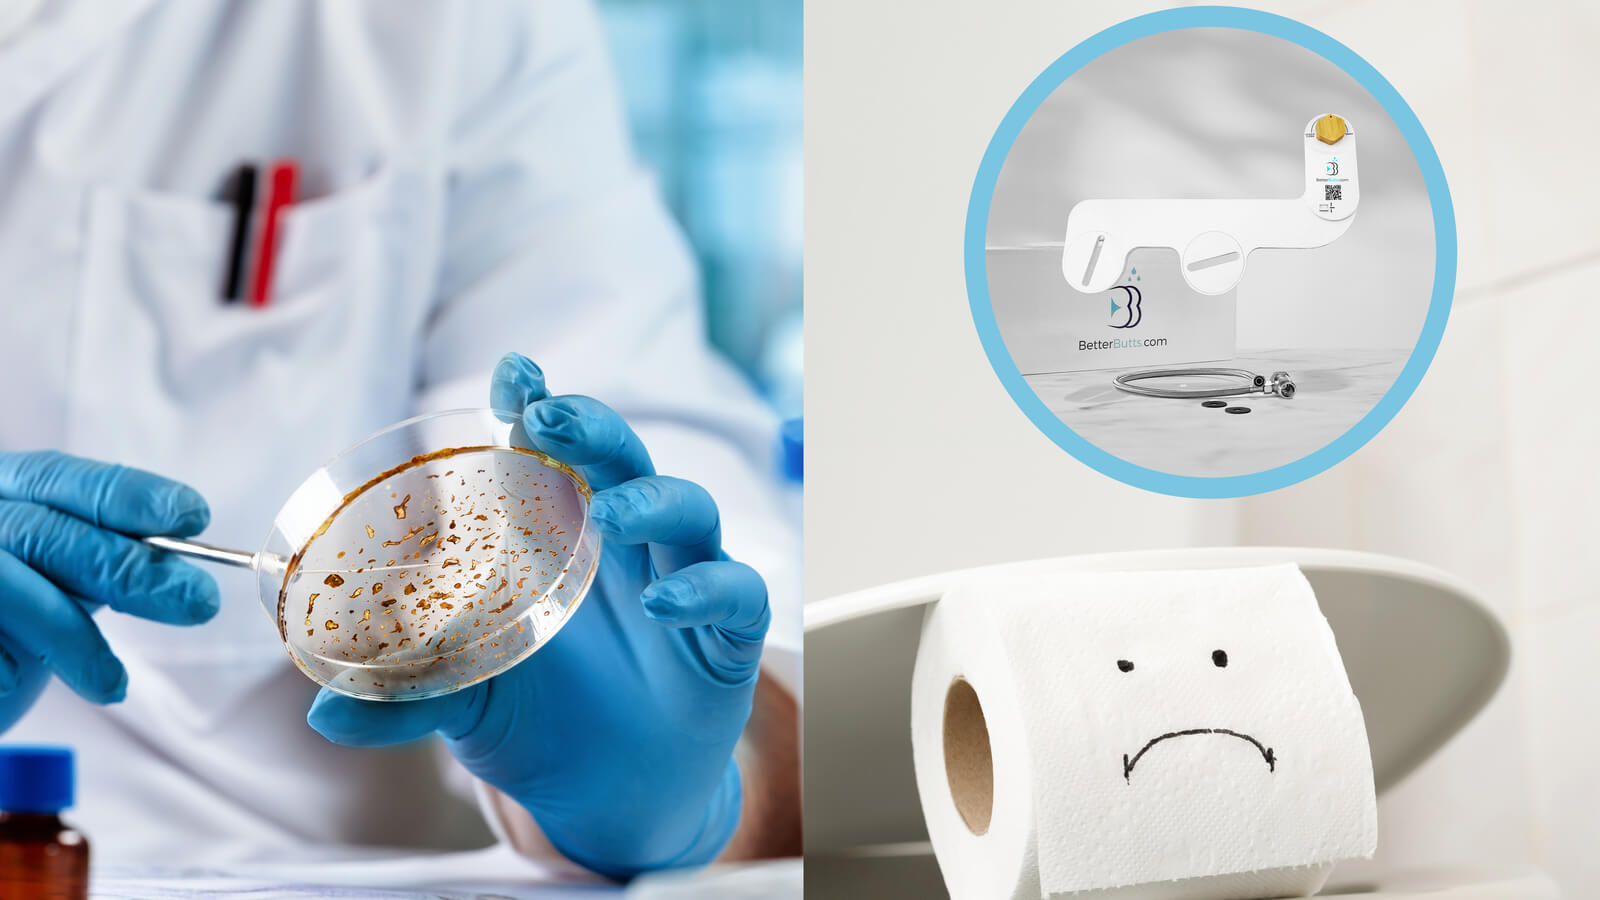 Toilet paper, of all things, poses serious risk for infection and hygiene complications (here's what you need to do...)